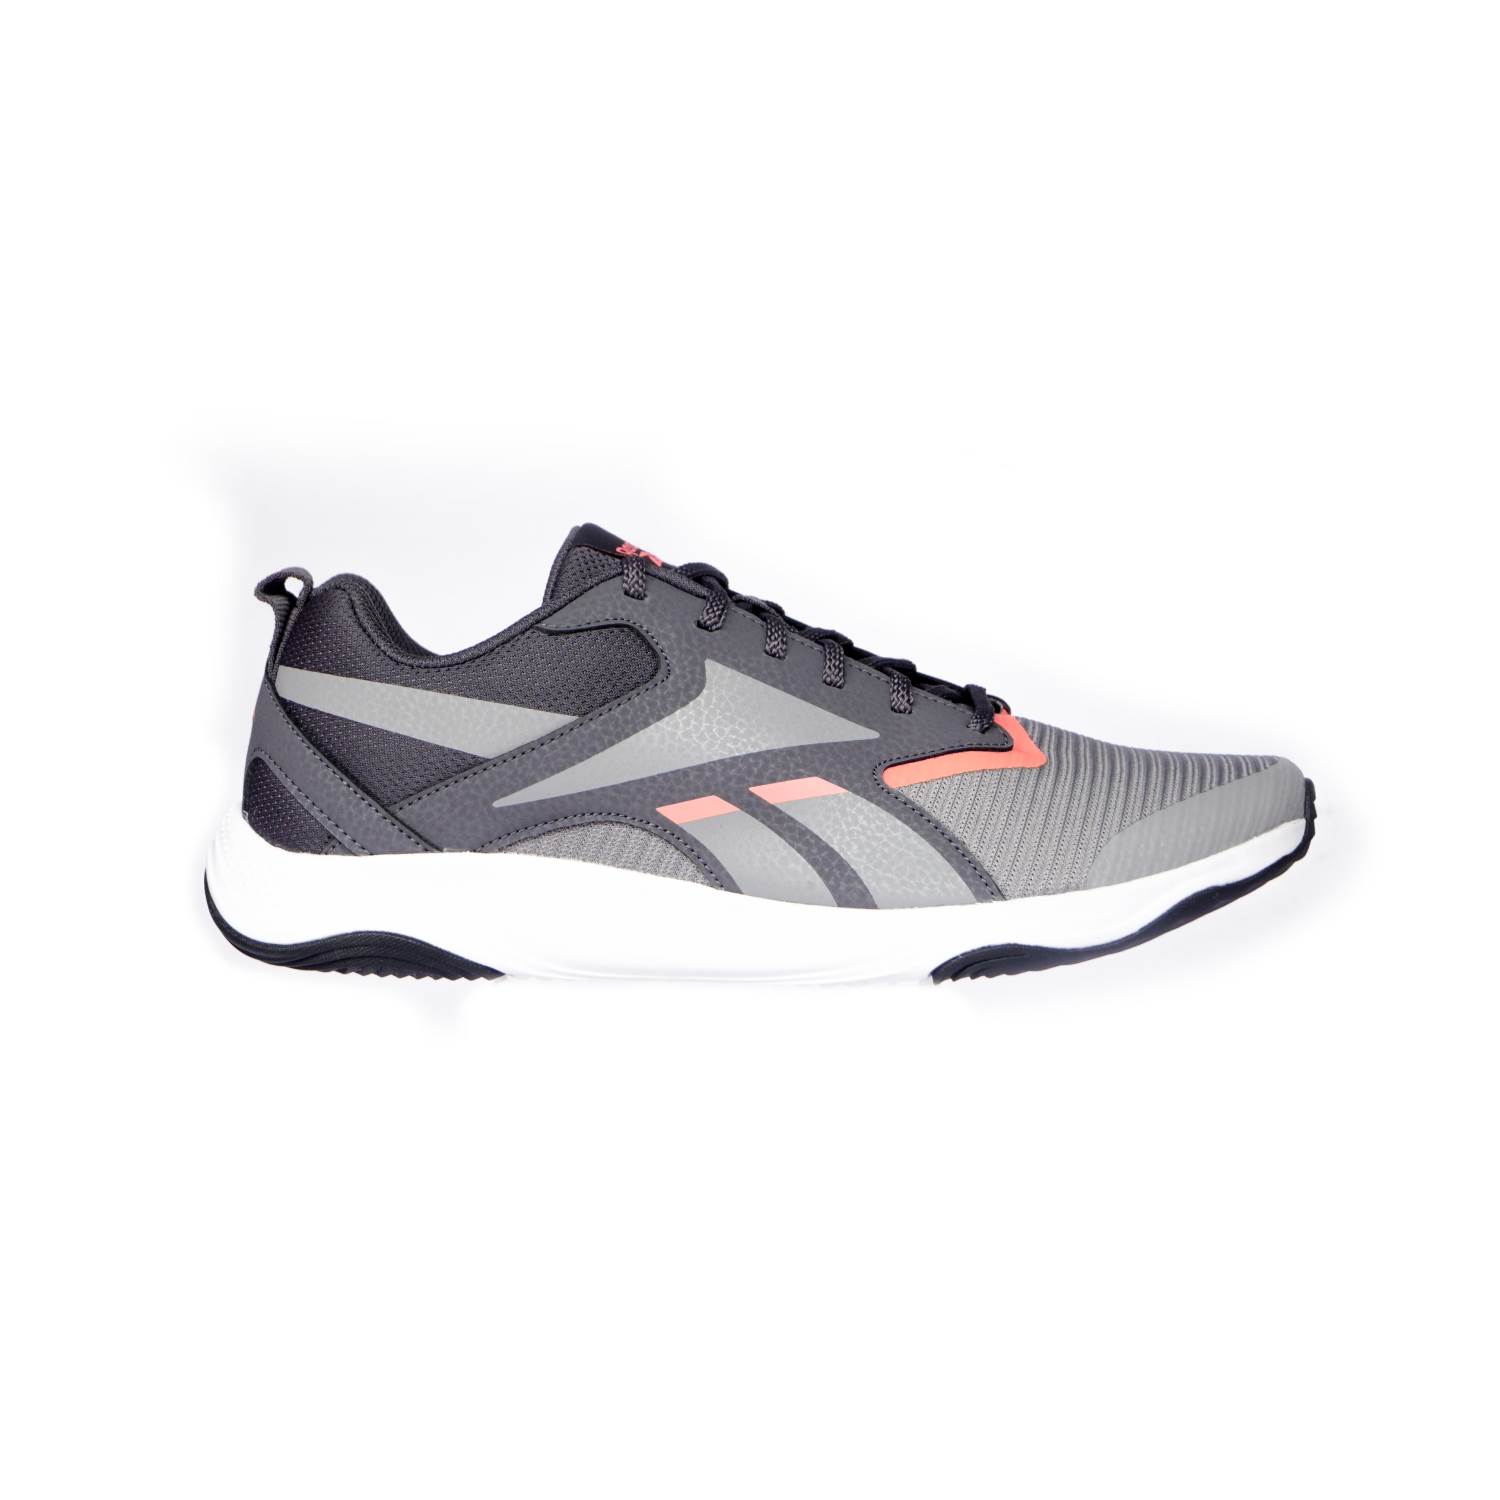 Reebok Brand Mens Running Casual Laced Sports Shoes Impact M GB1924  (D.Grey/Orange) :: RAJASHOES